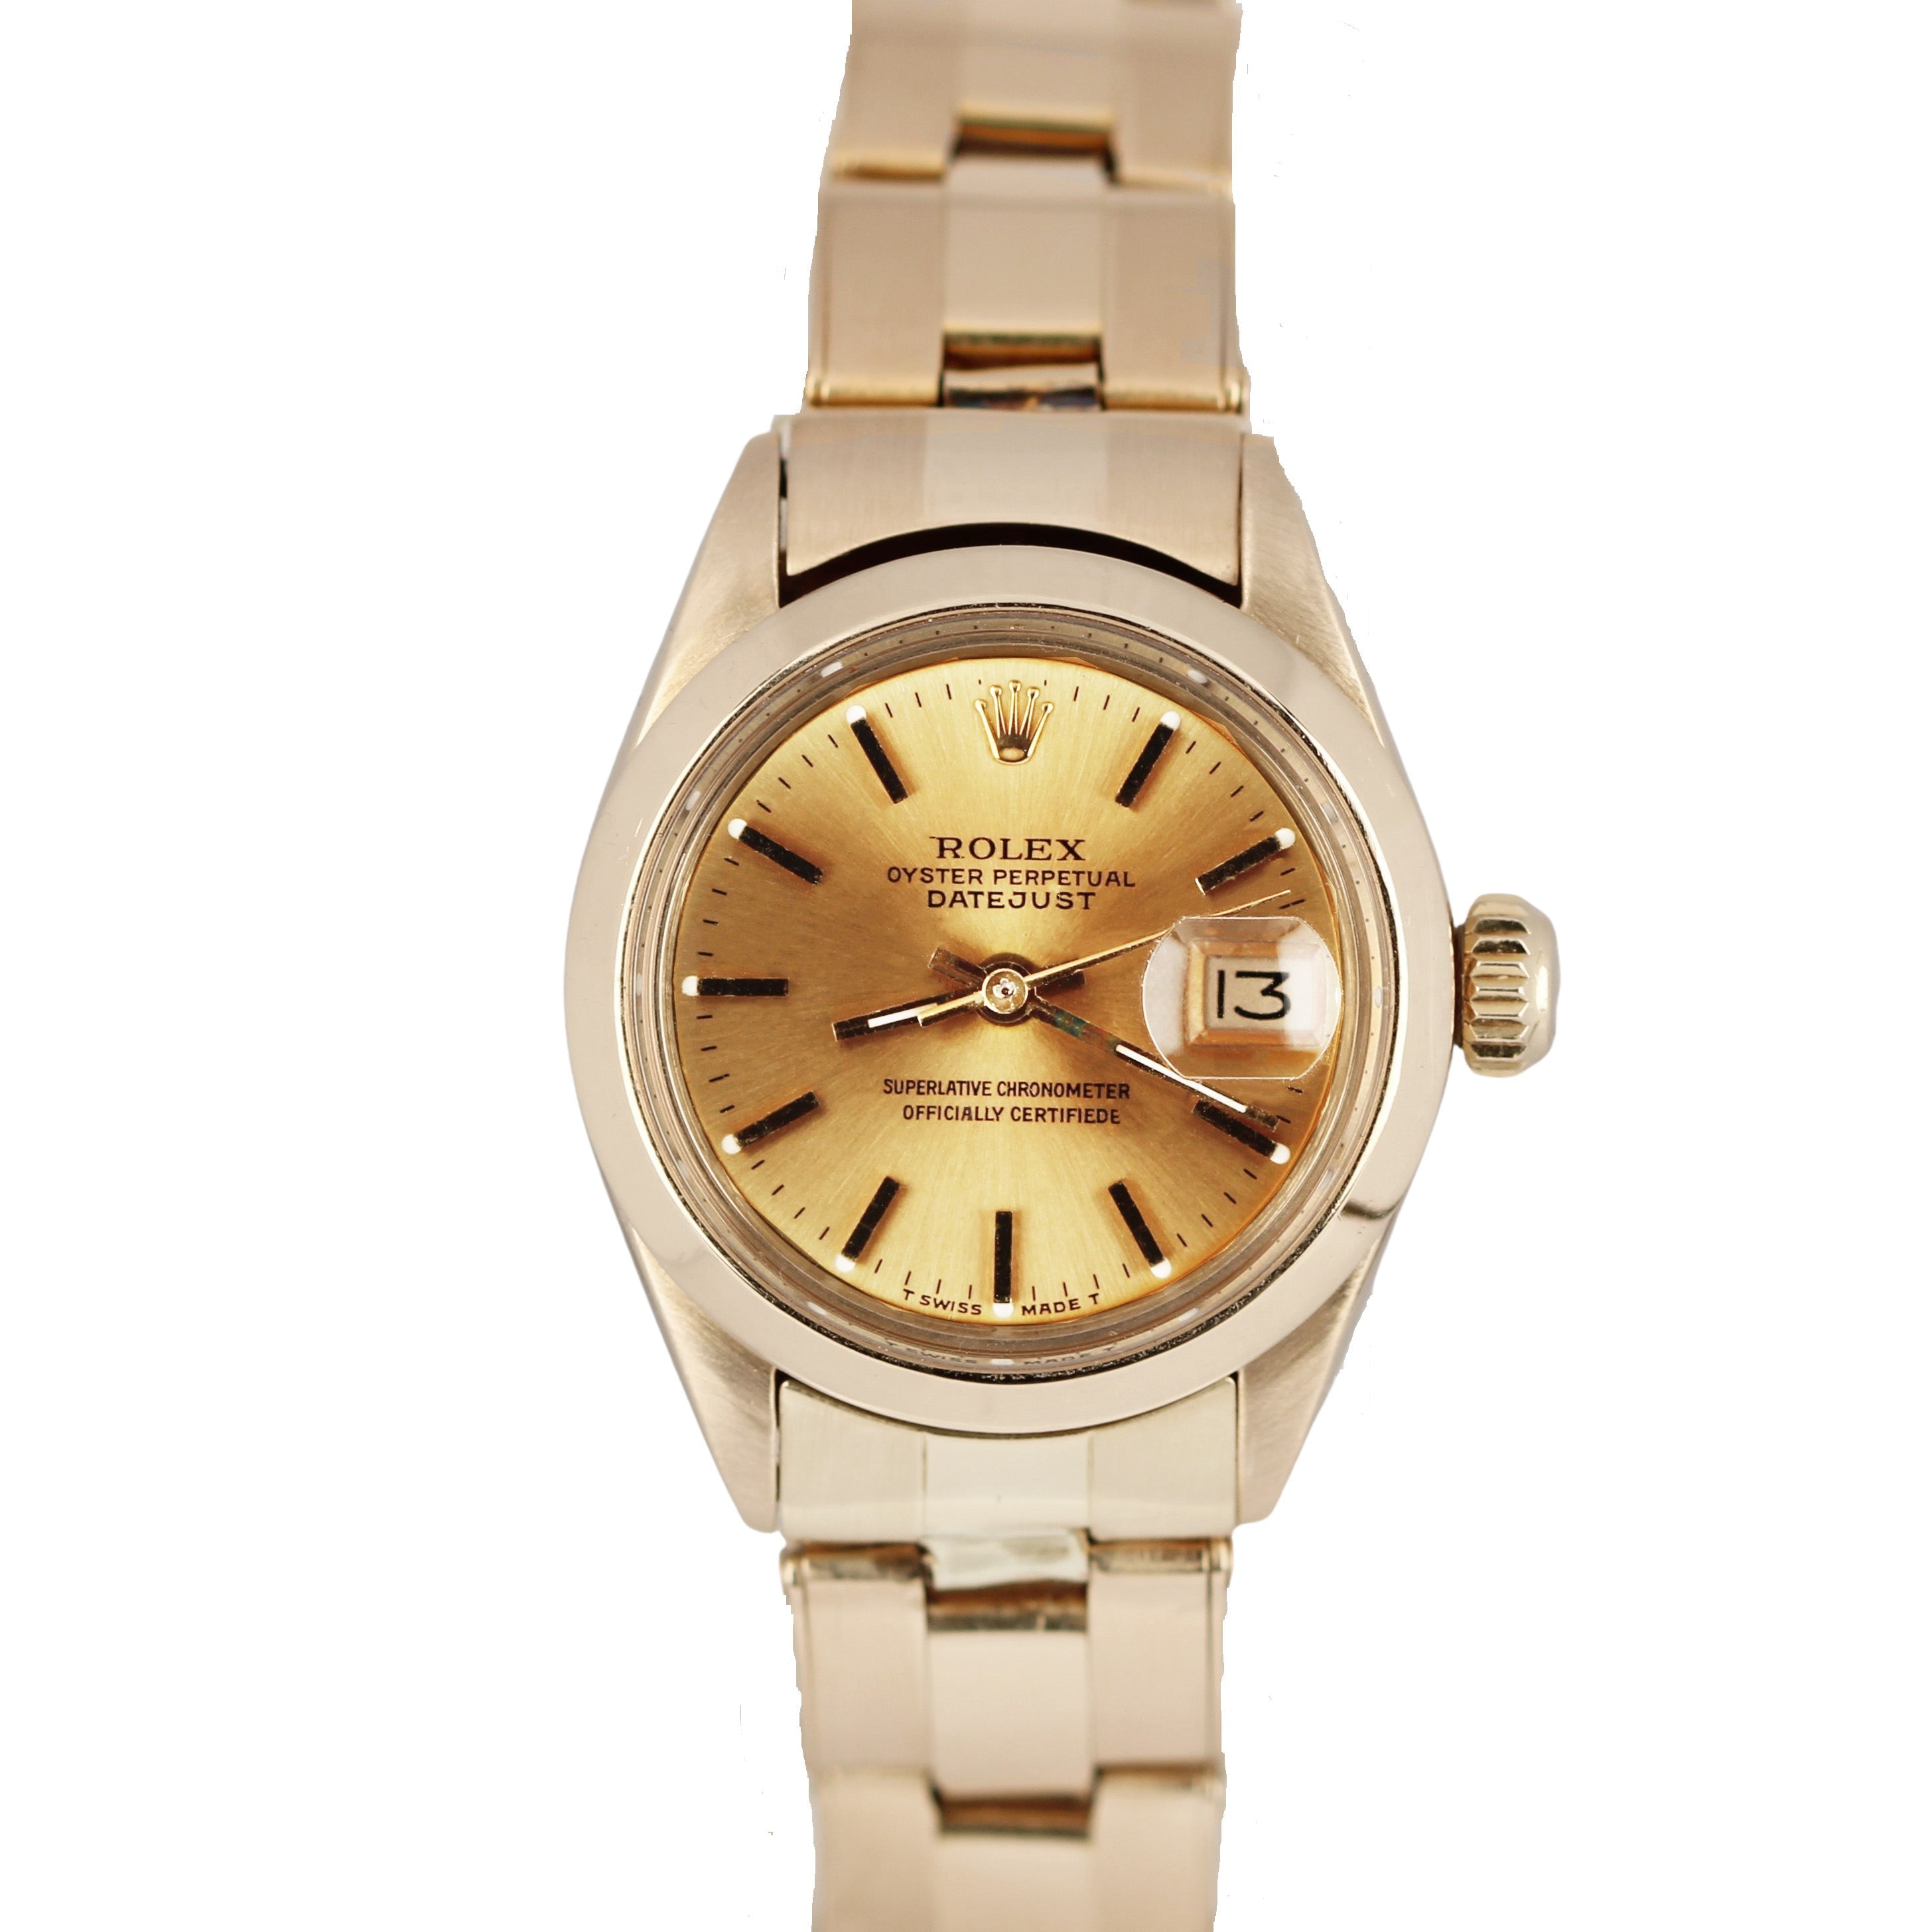 ROLEX OYSTER PERPETUAL DATEJUST 18K Yellow Gold Watch